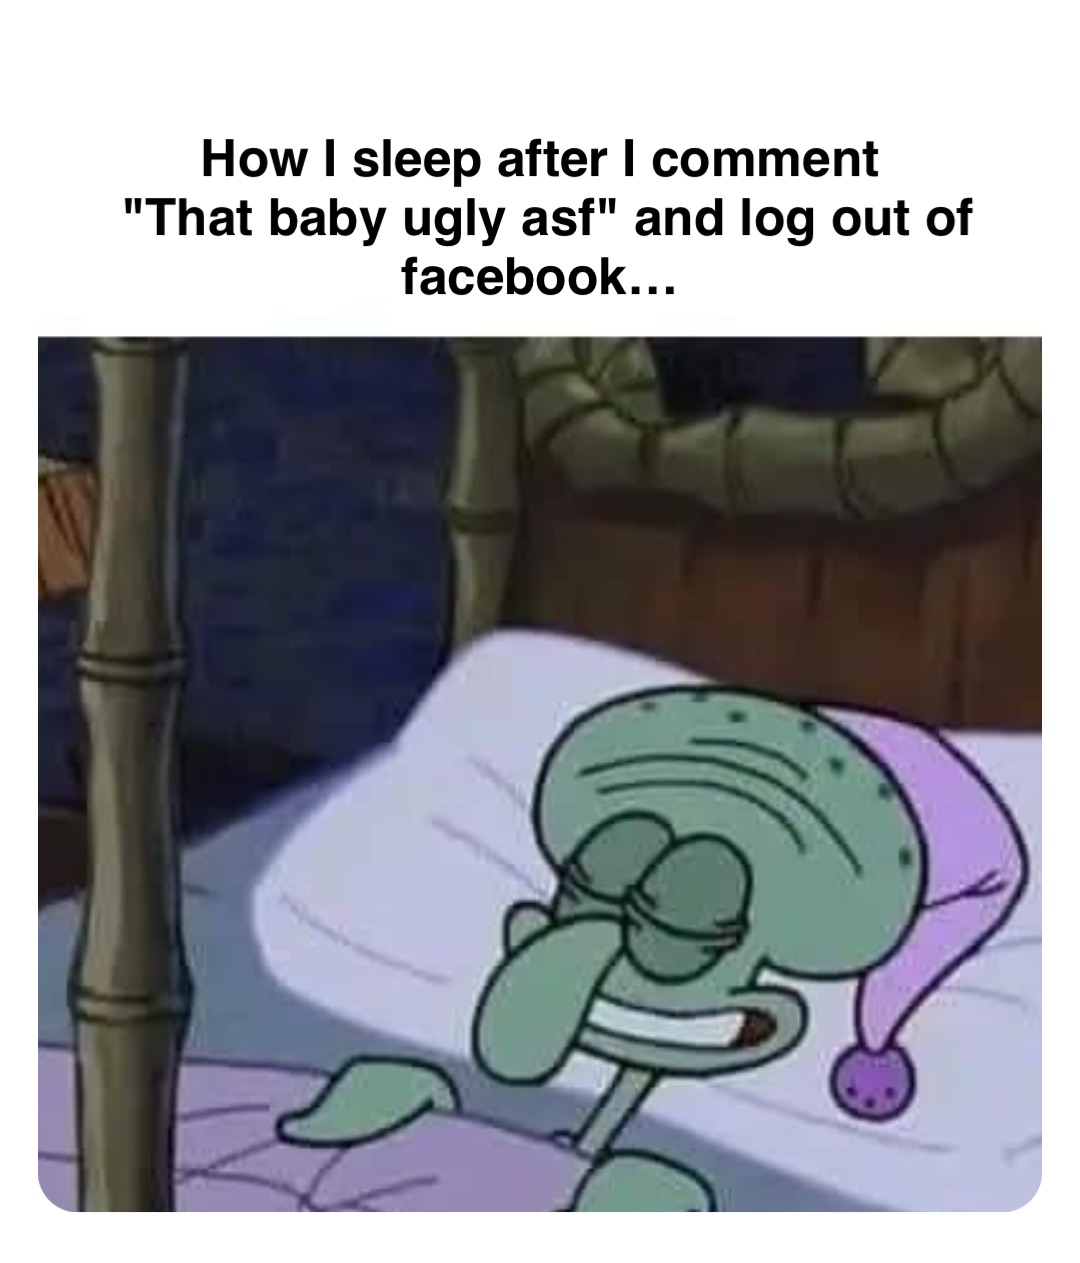 Double tap to edit How I sleep after I comment
"That baby ugly asf" and log out of facebook…